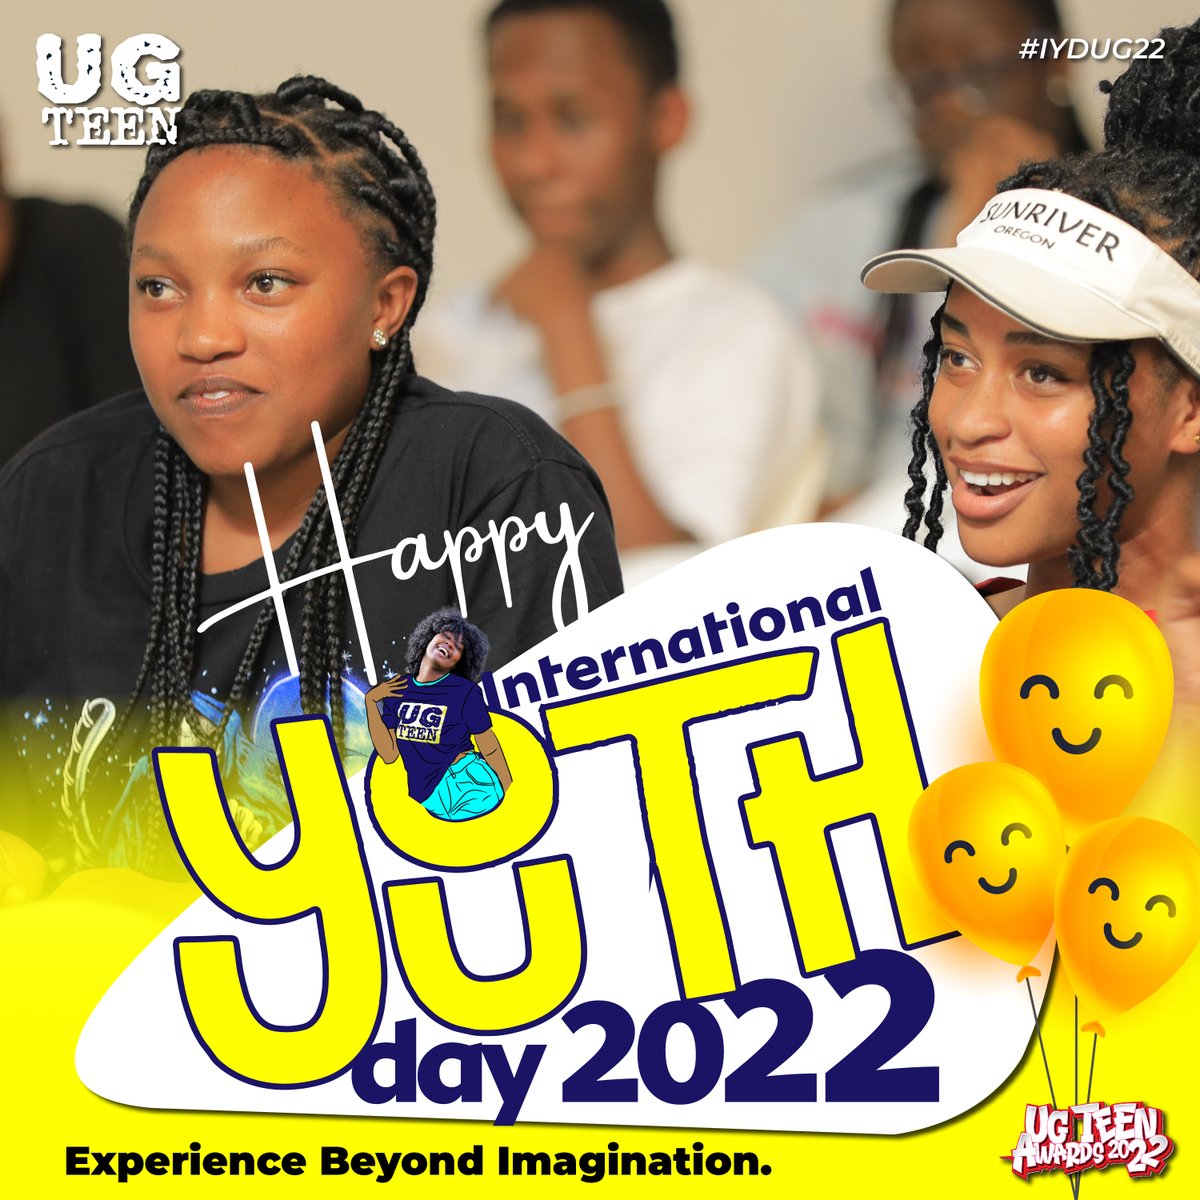 We believe the youth are the pillar of this nation.
Today we celebrate US!
Happy International Youth Day 🙂

#IYDUG22 
#UgTeenAwards2022
#IYD22